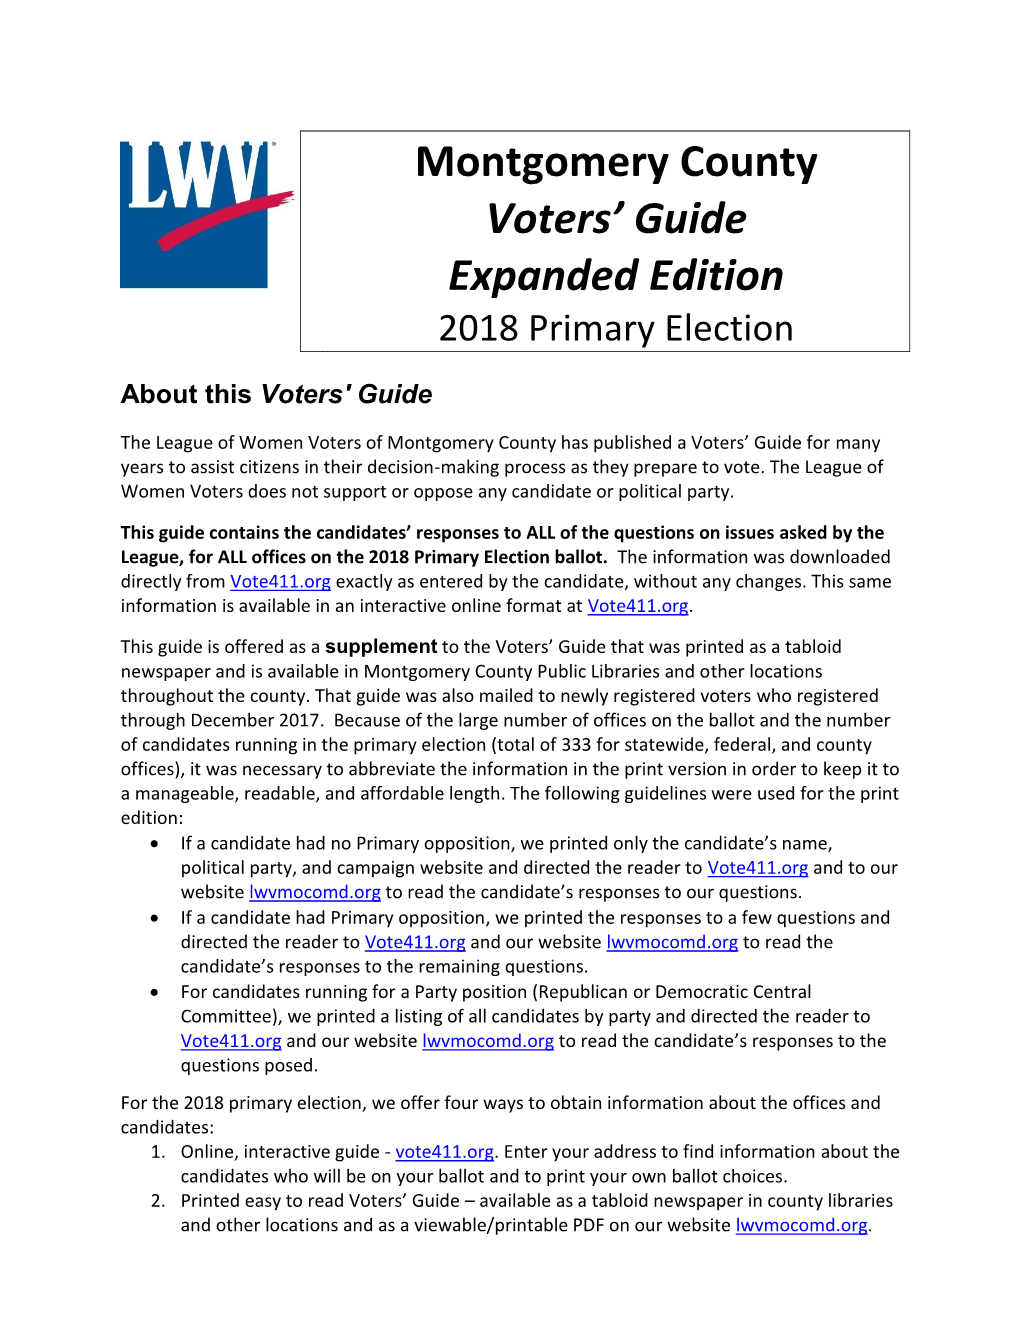 Montgomery County Voters' Guide Expanded Edition